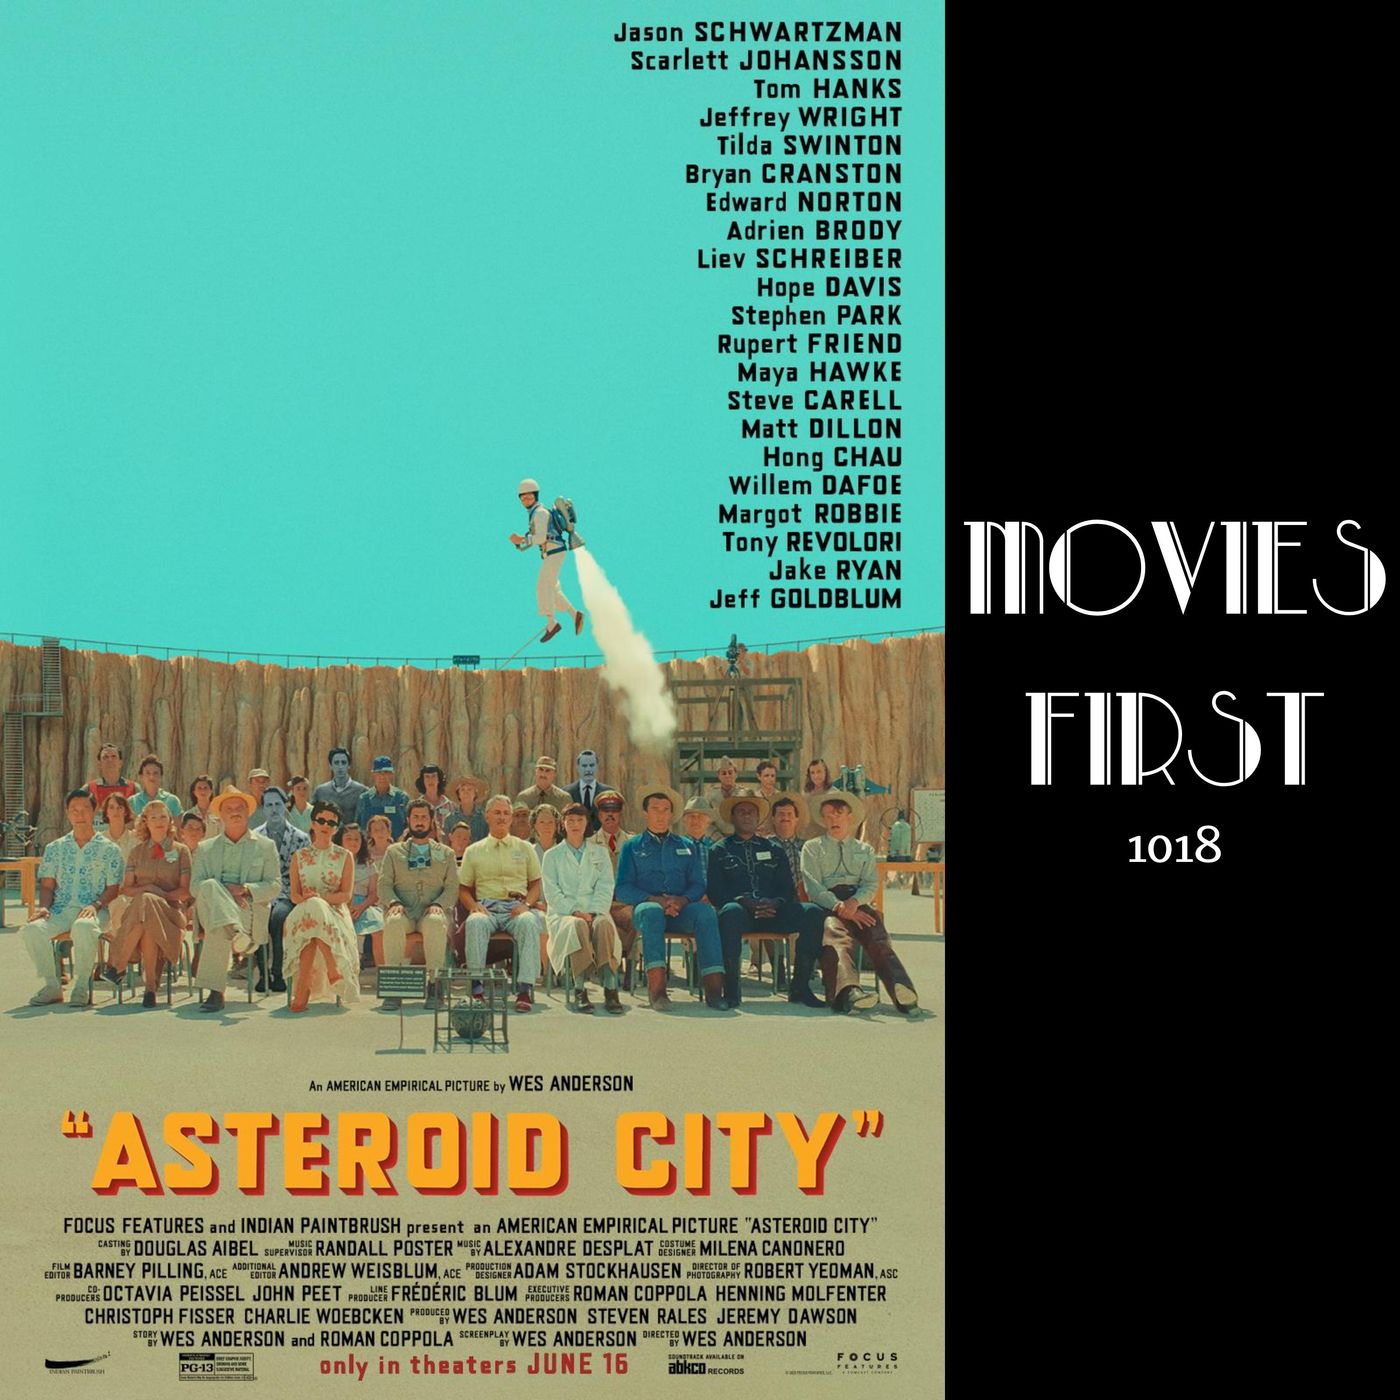 1018: Whimsical Whirlwind: A Dive into ’Asteroid City’ (movie review)